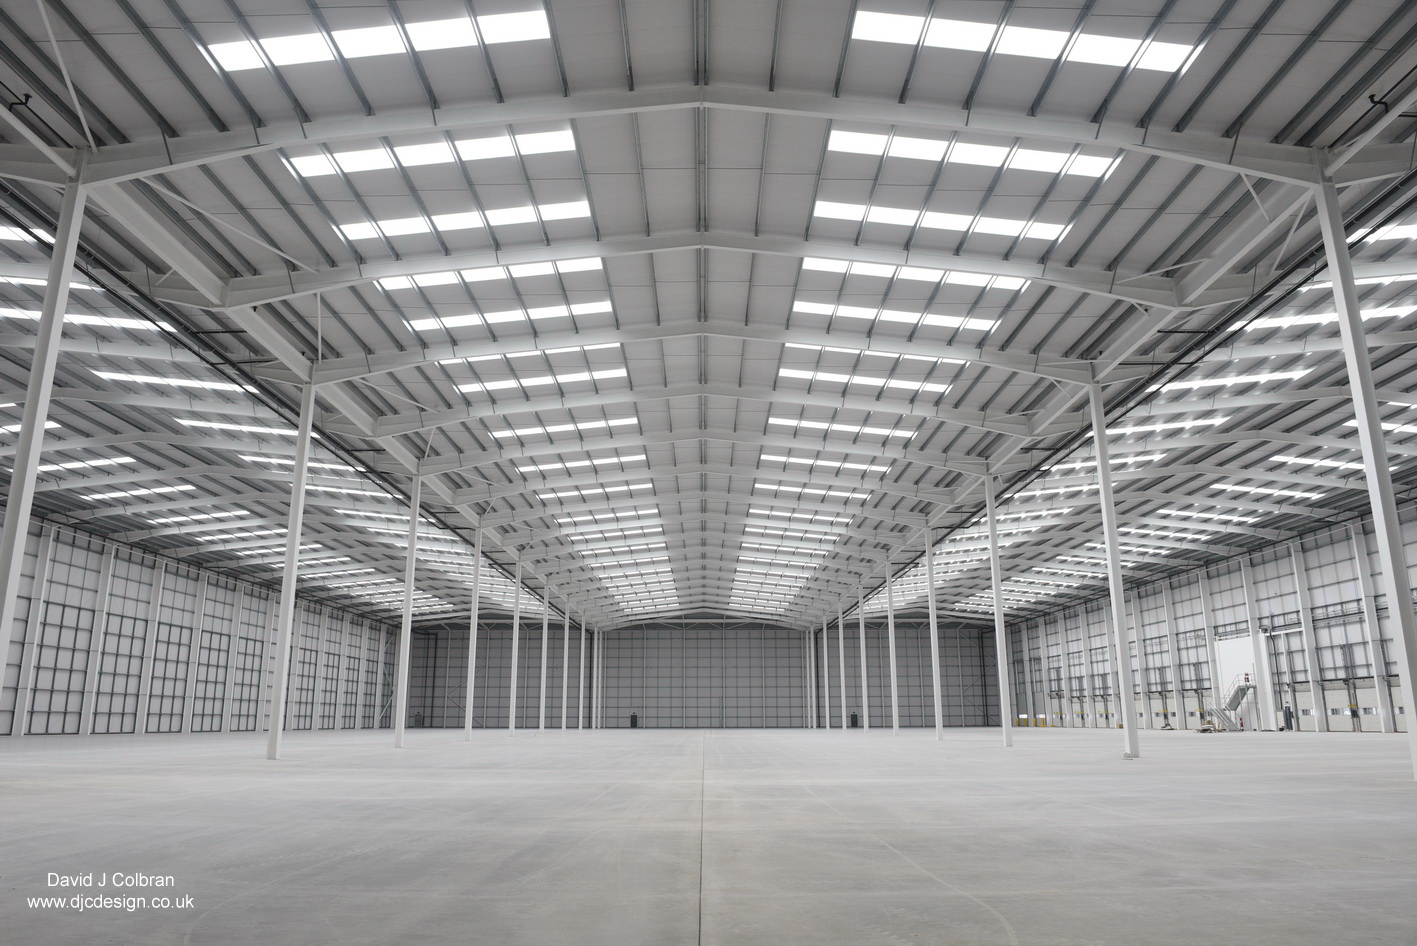 on location photography example - a large empty storage facility